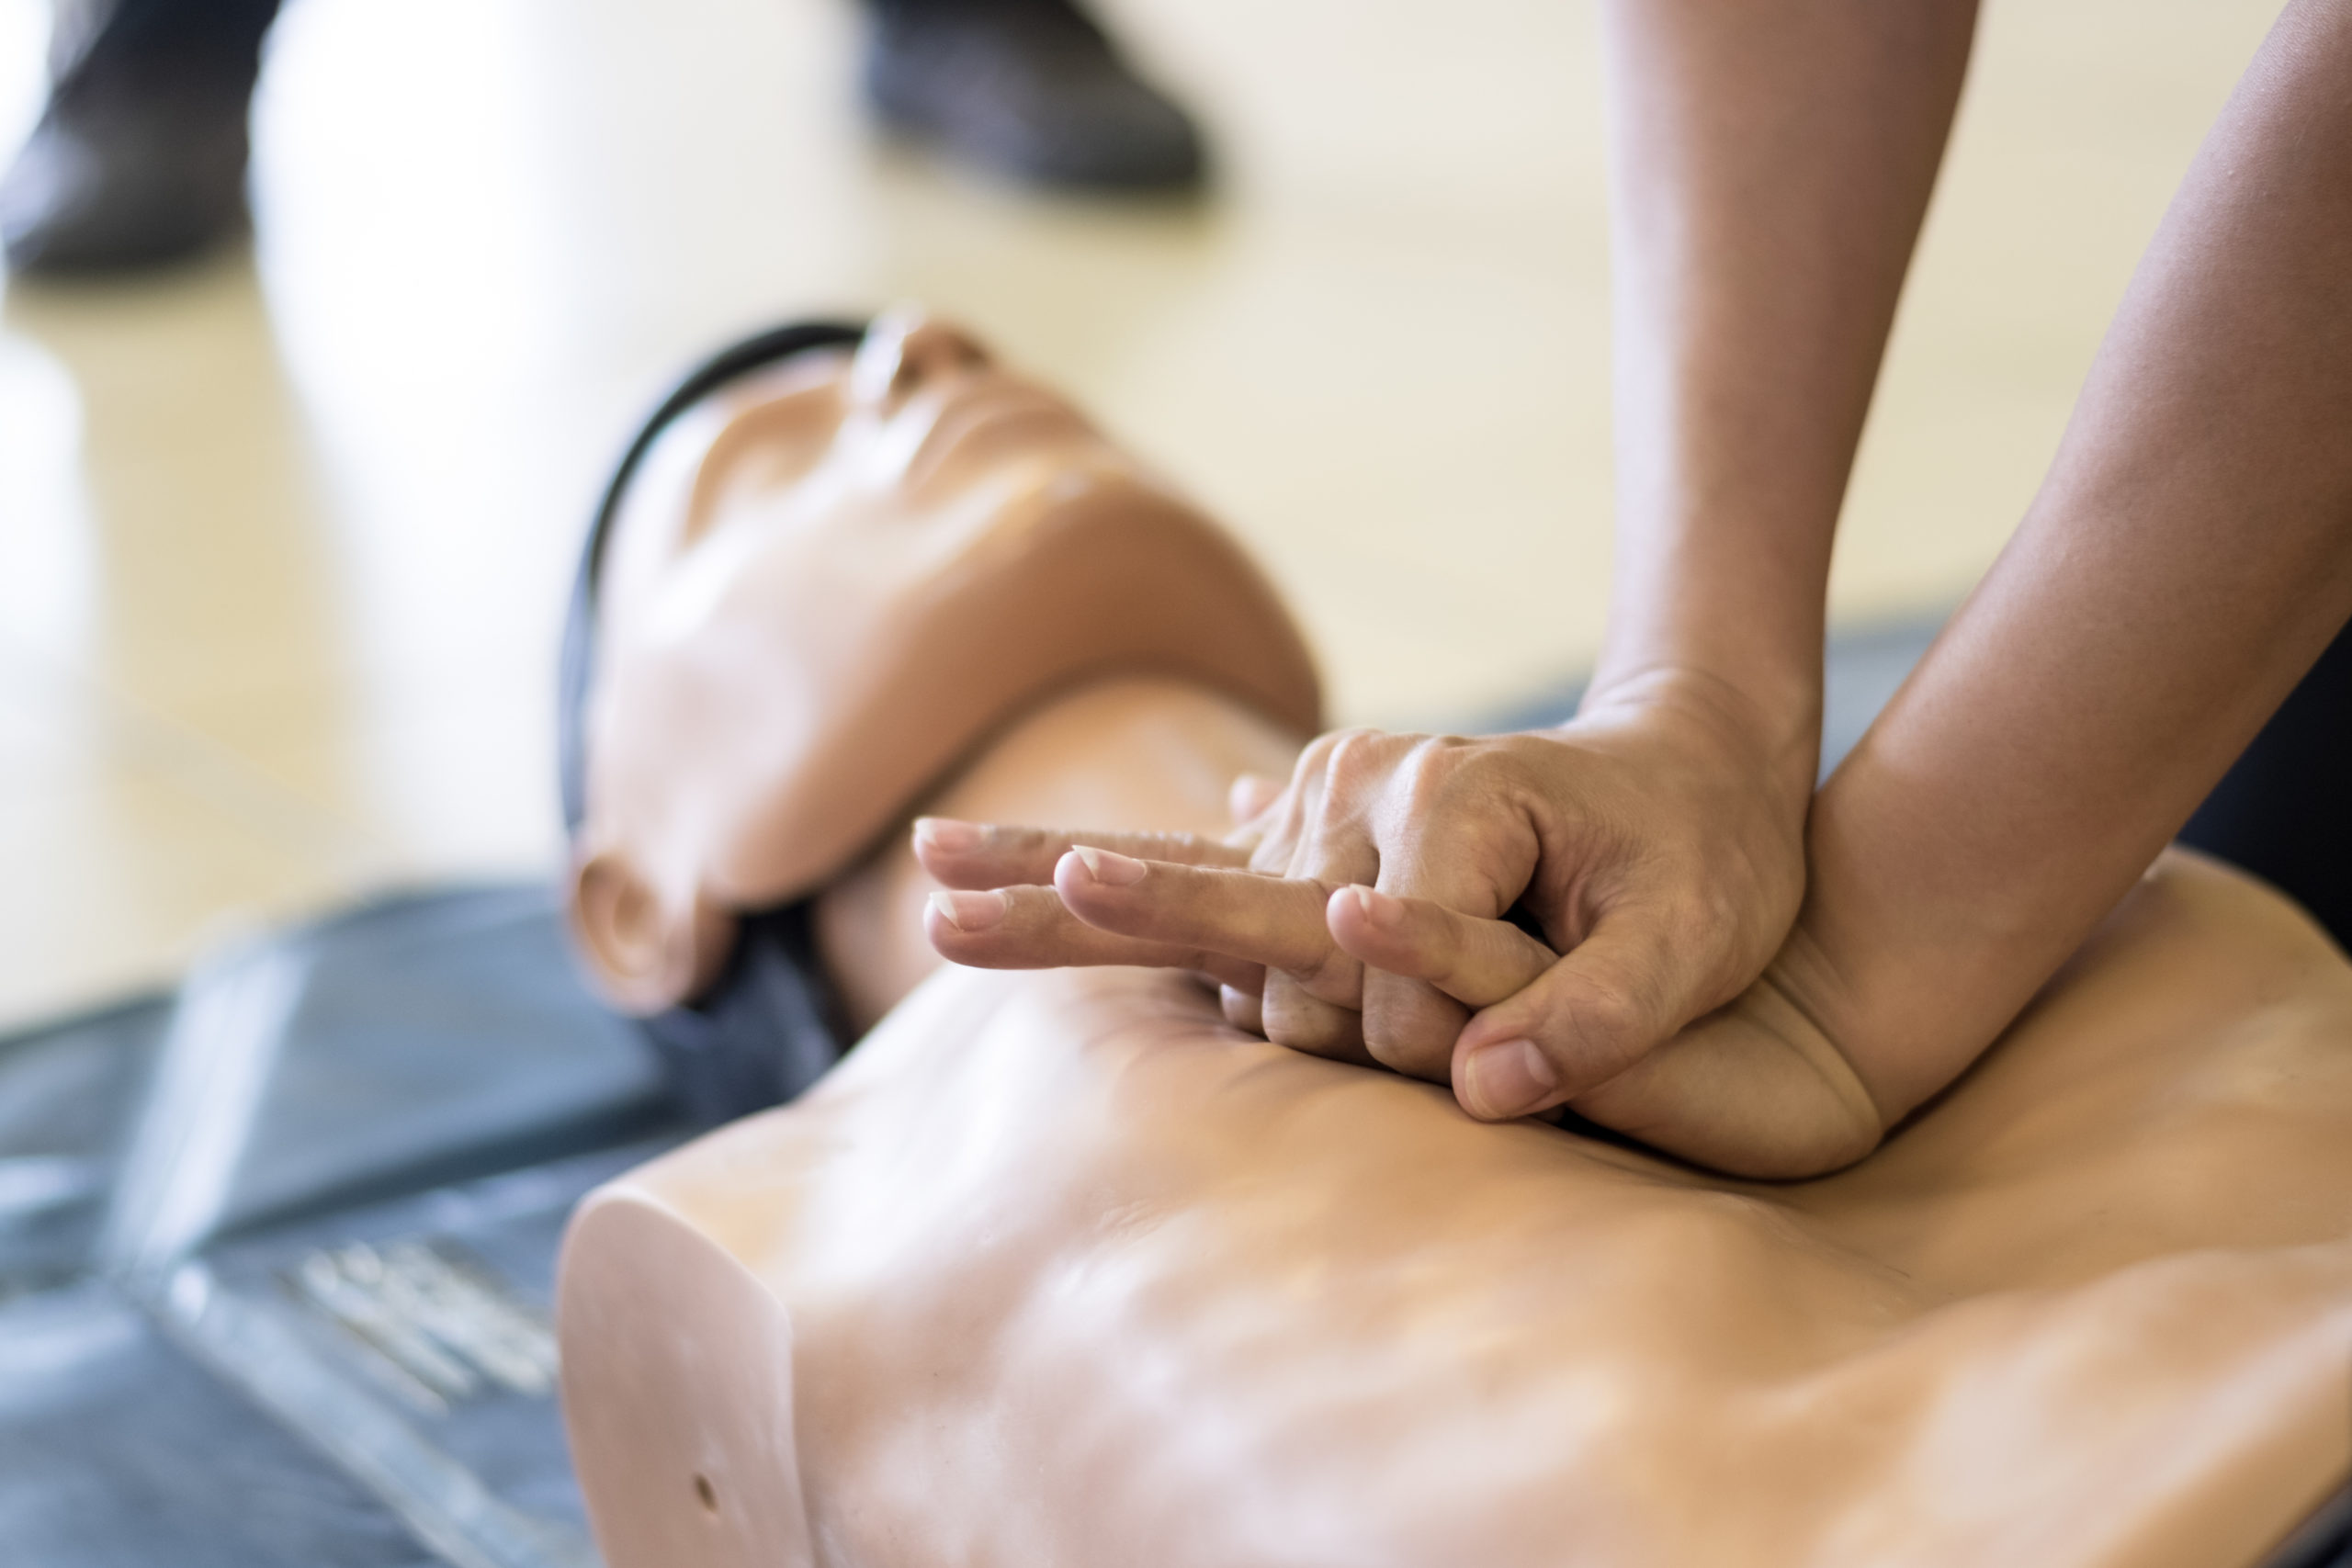 New Movement Aligns Narcan Training With CPR